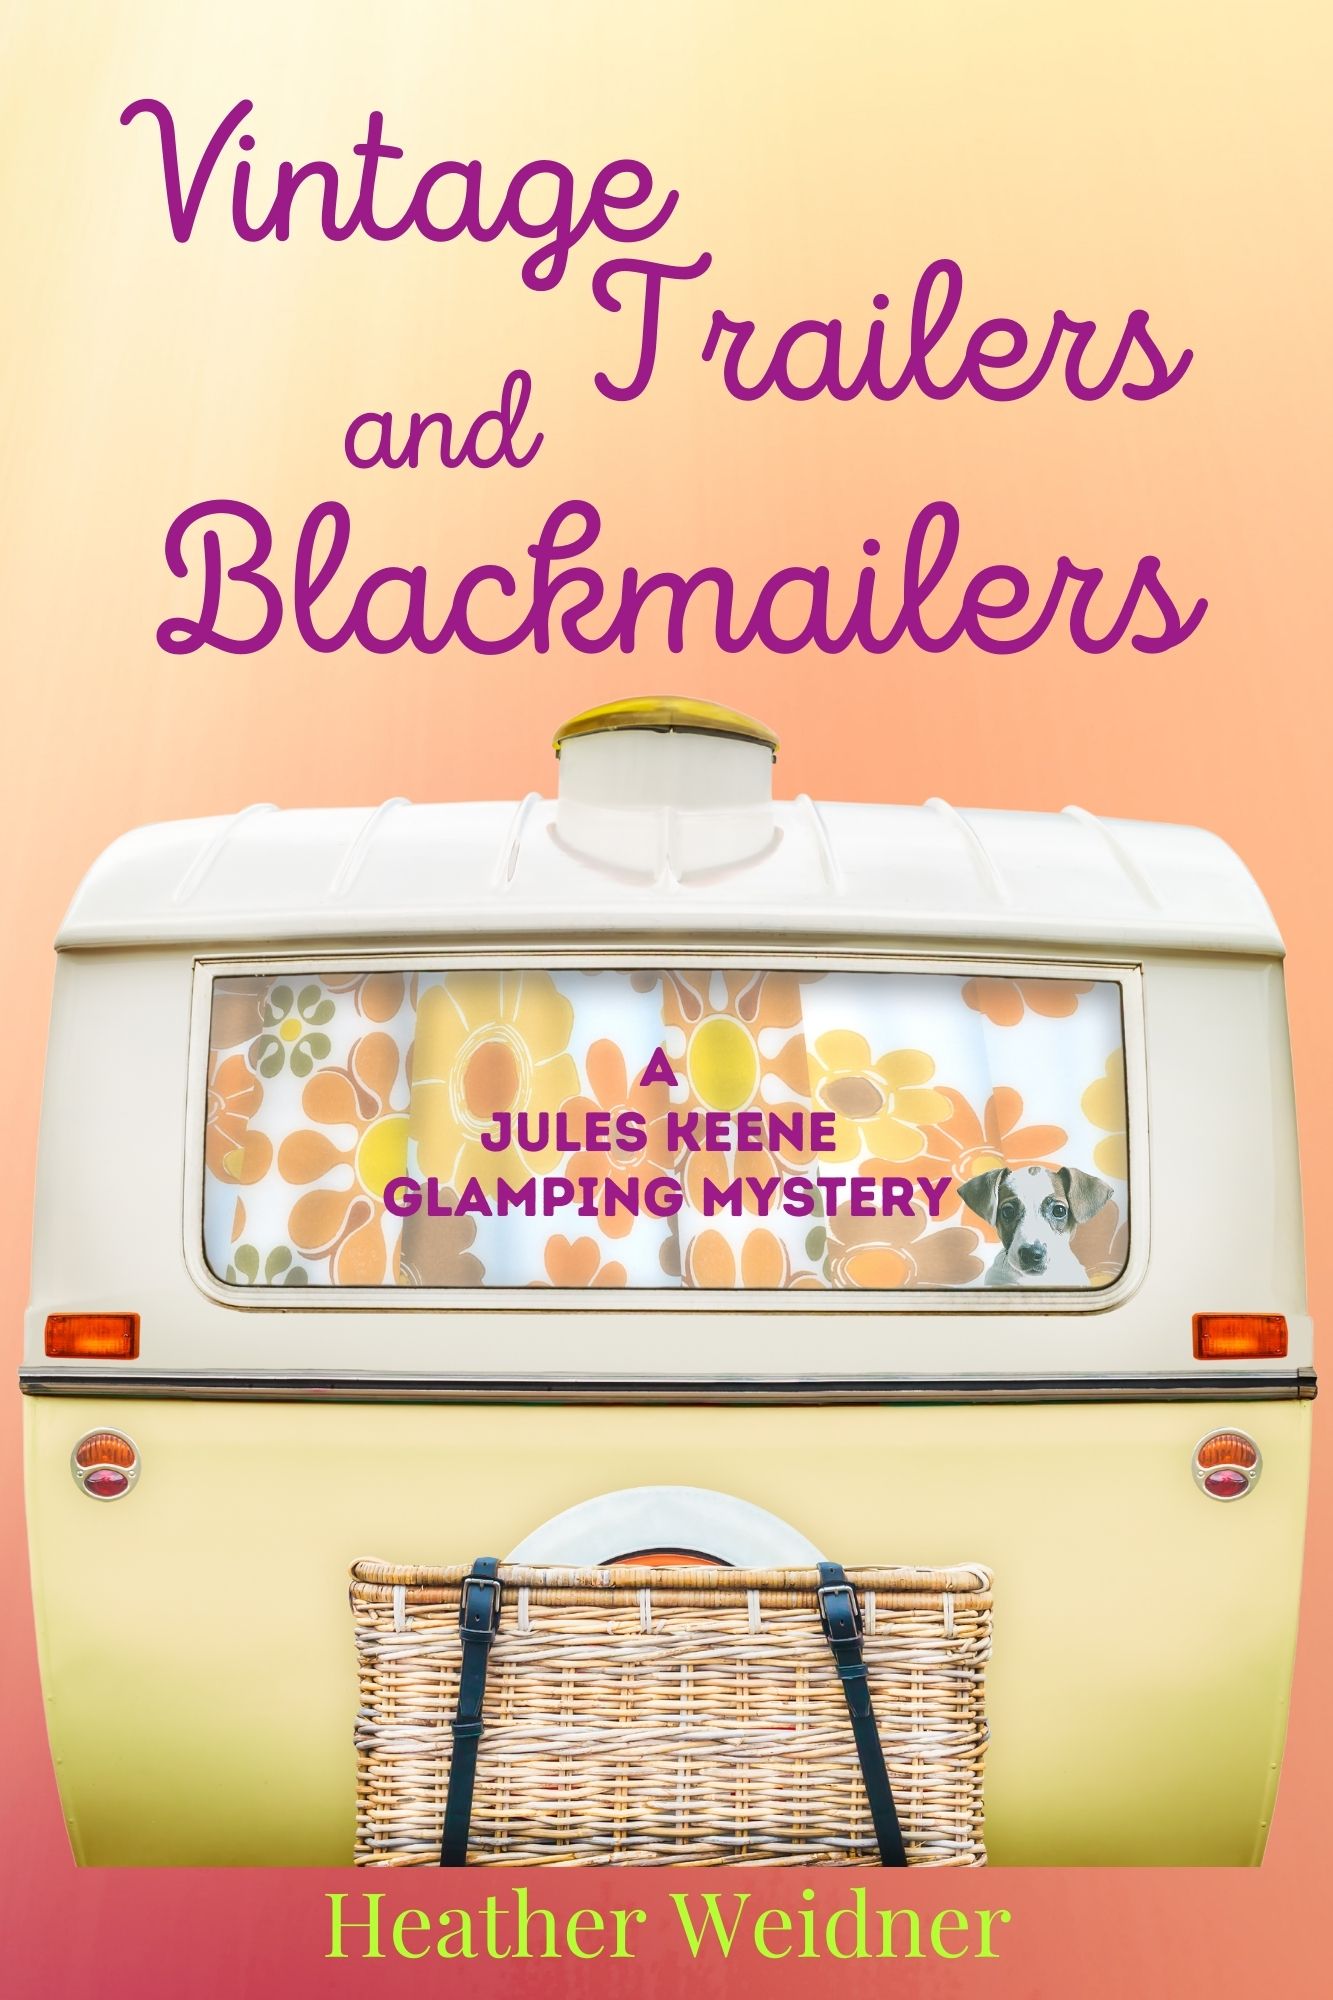 Vintage Trailers and Blackmailers by Heather Weidner